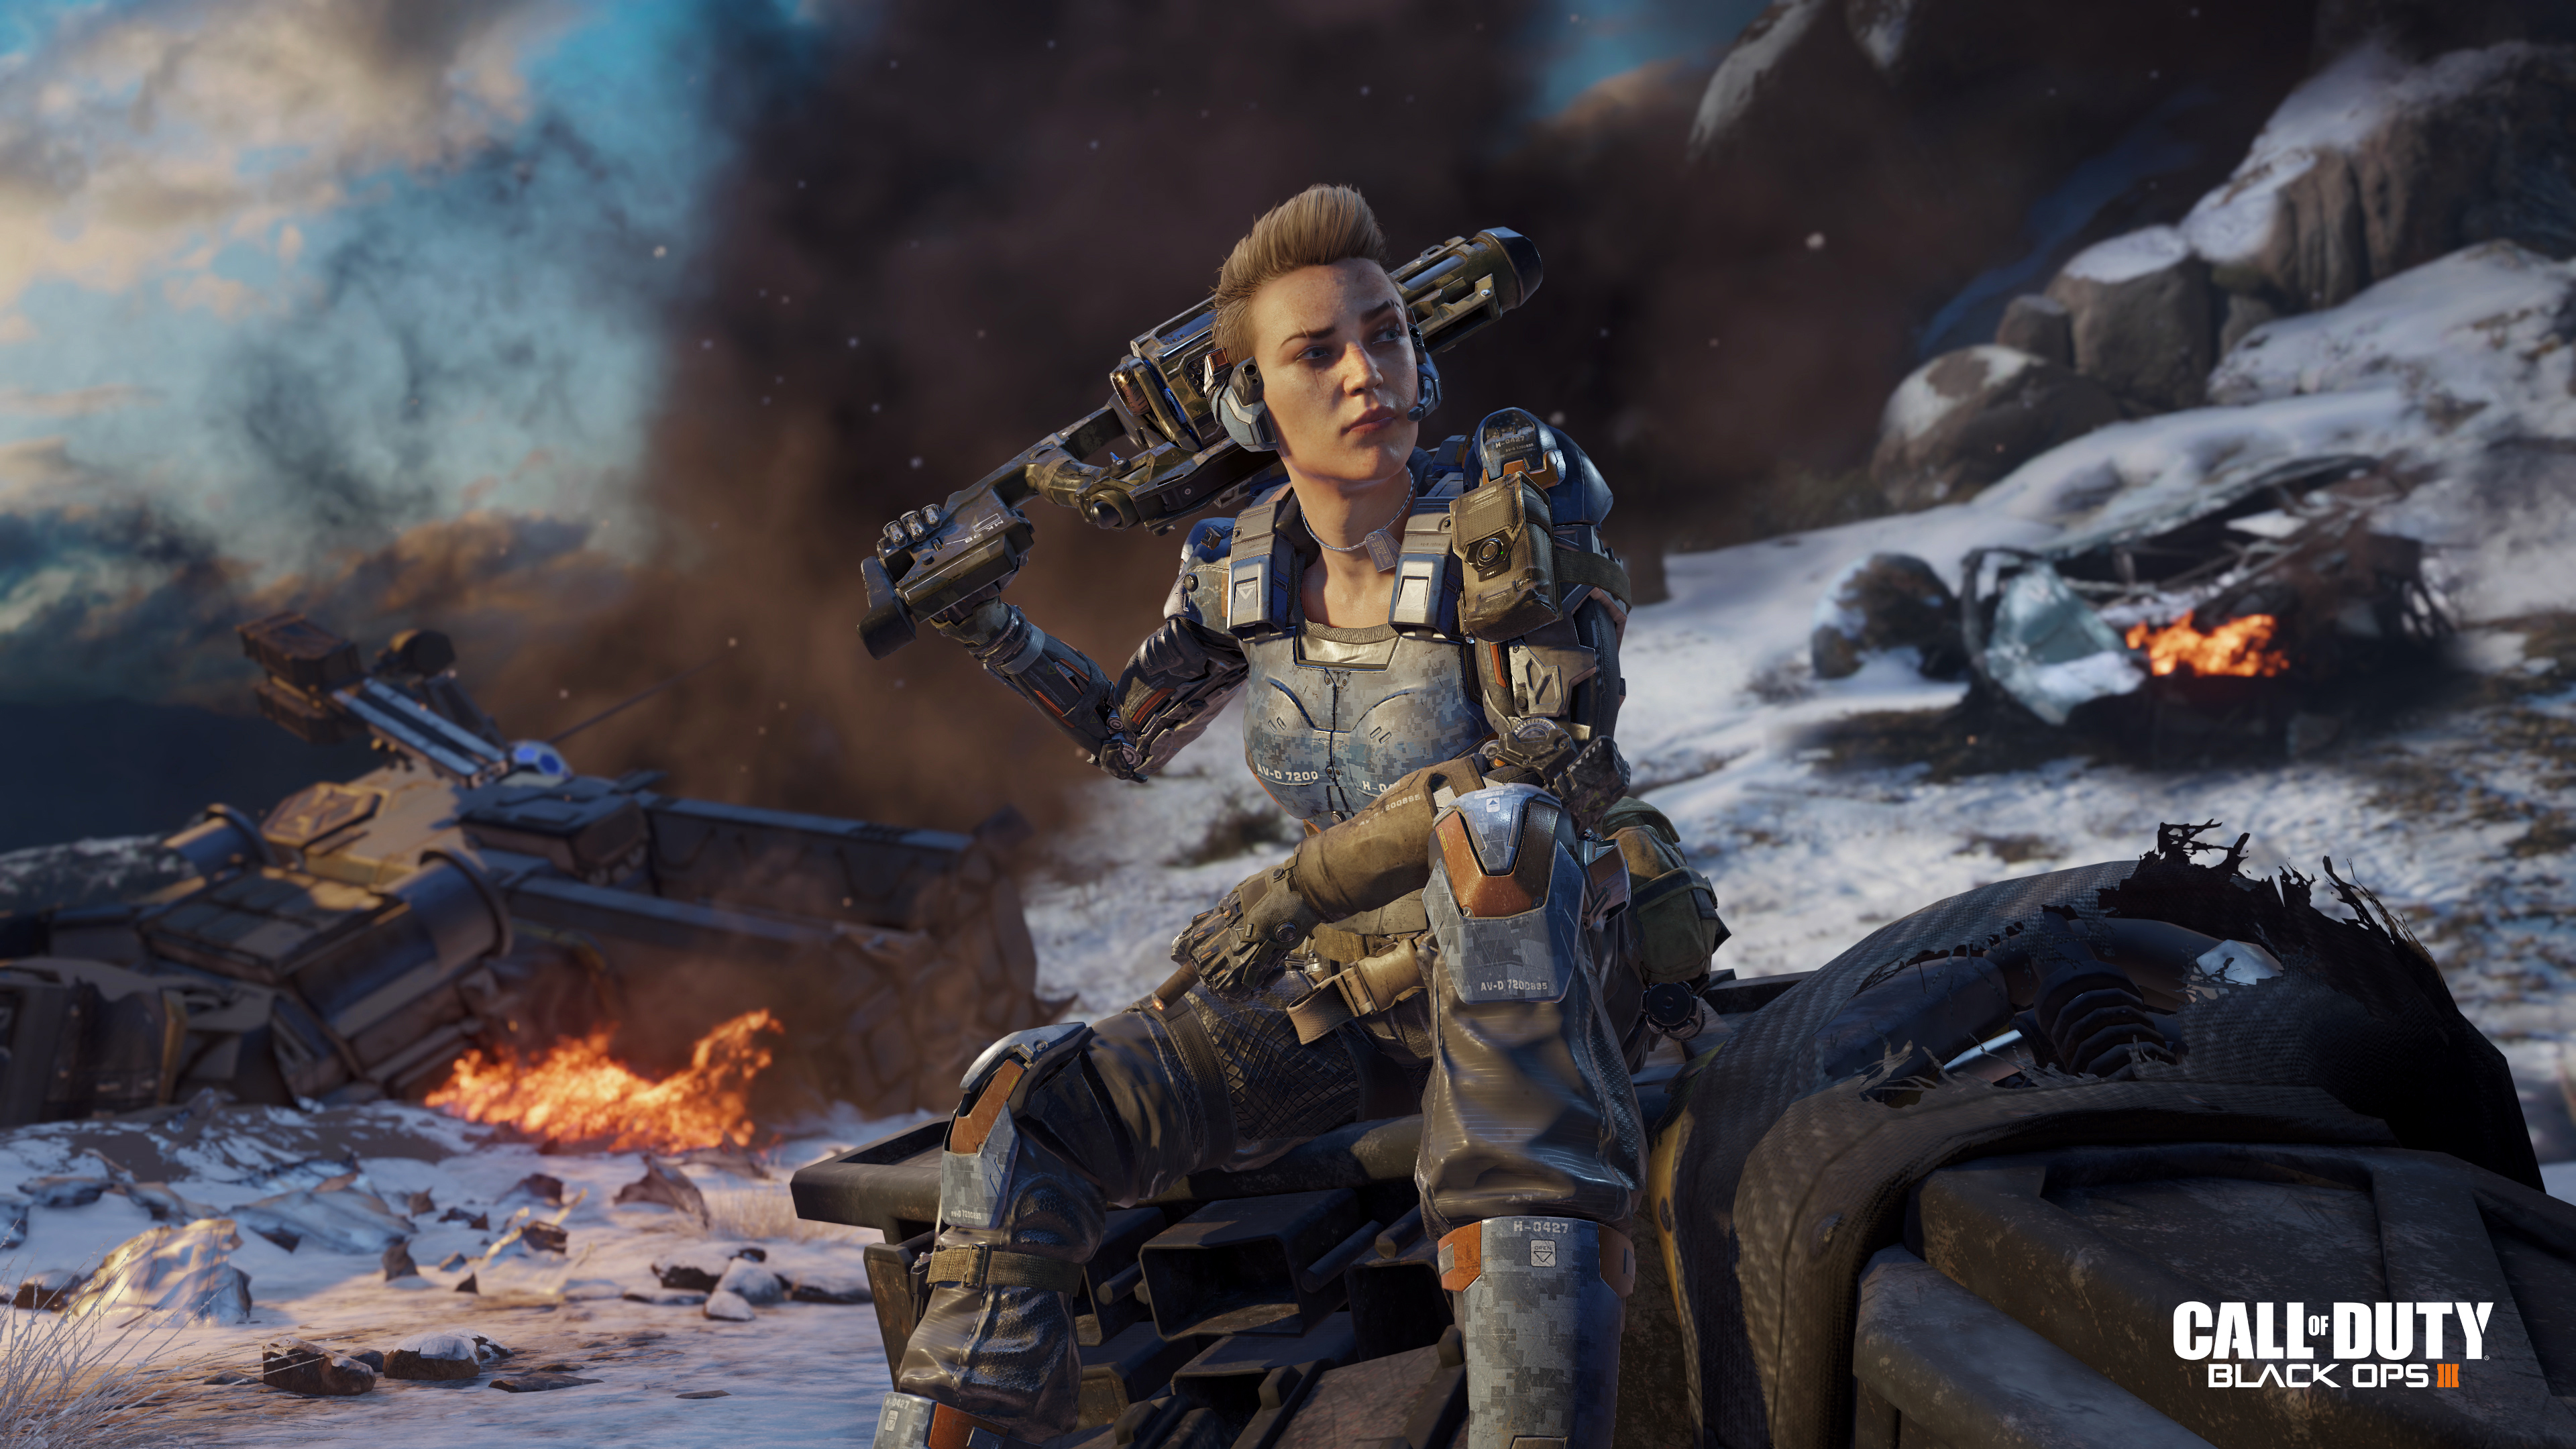 Call Of Duty Black Ops Features Treyarch S Most Ambitious Campaign